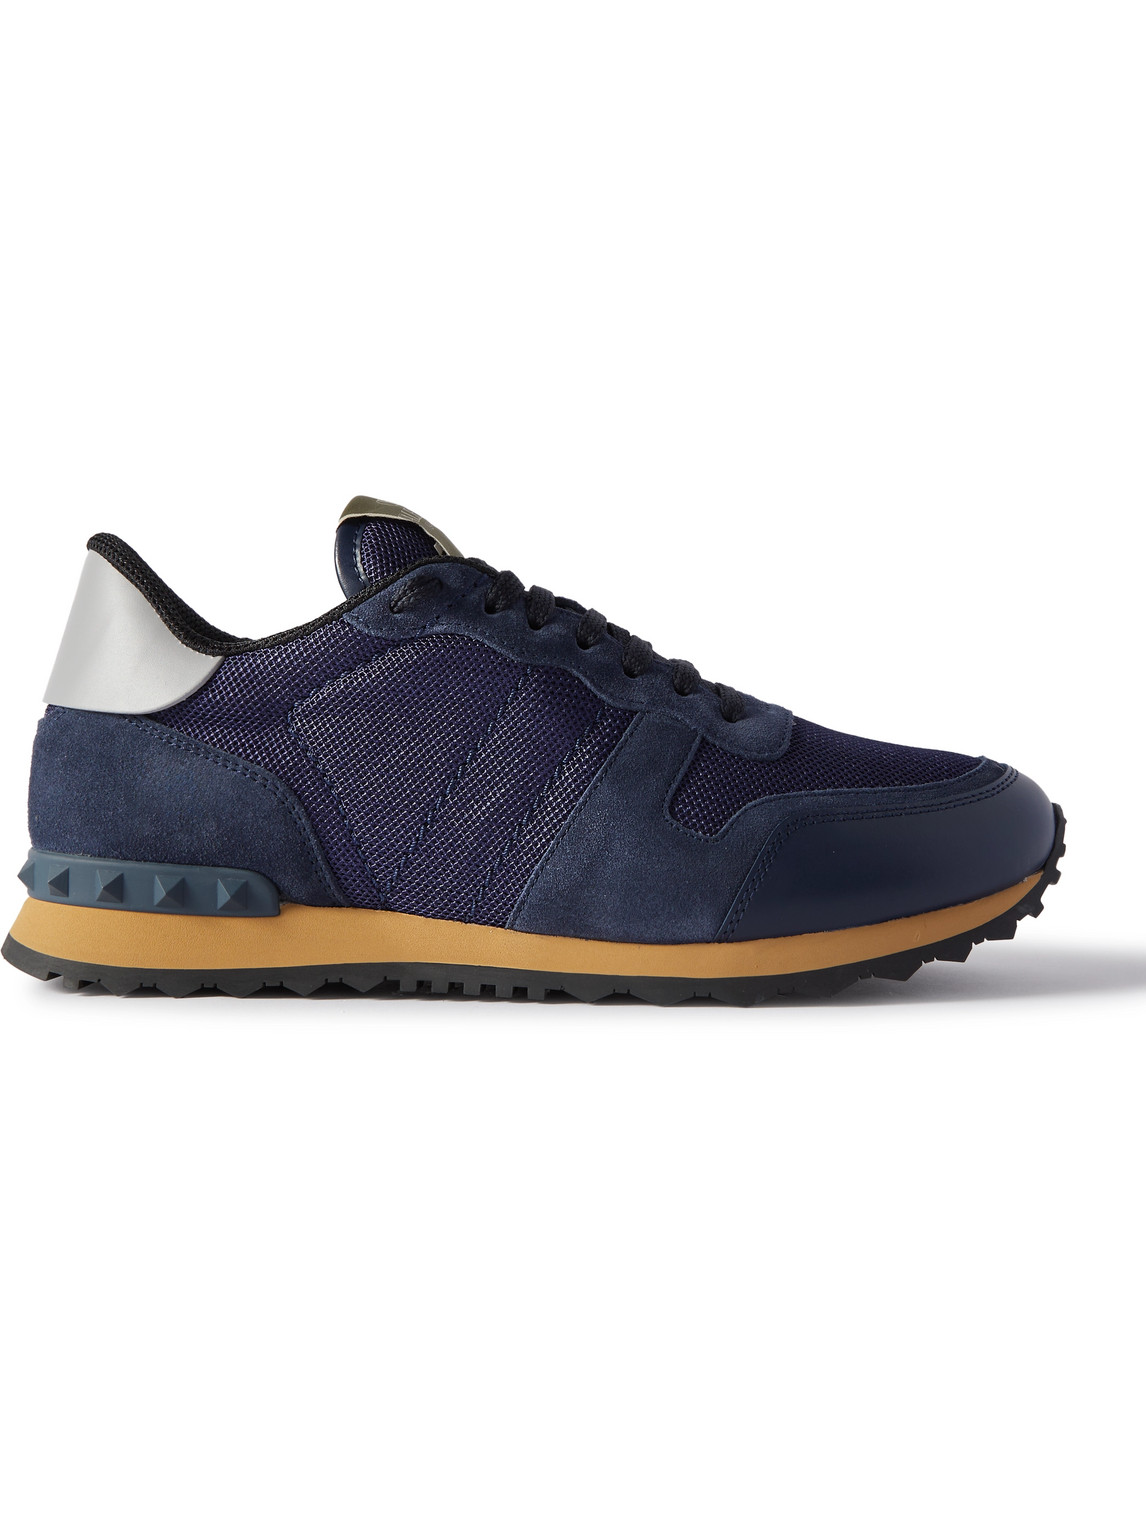 Valentino Garavani Rockrunner Suede, Leather And Mesh Sneakers In Blue